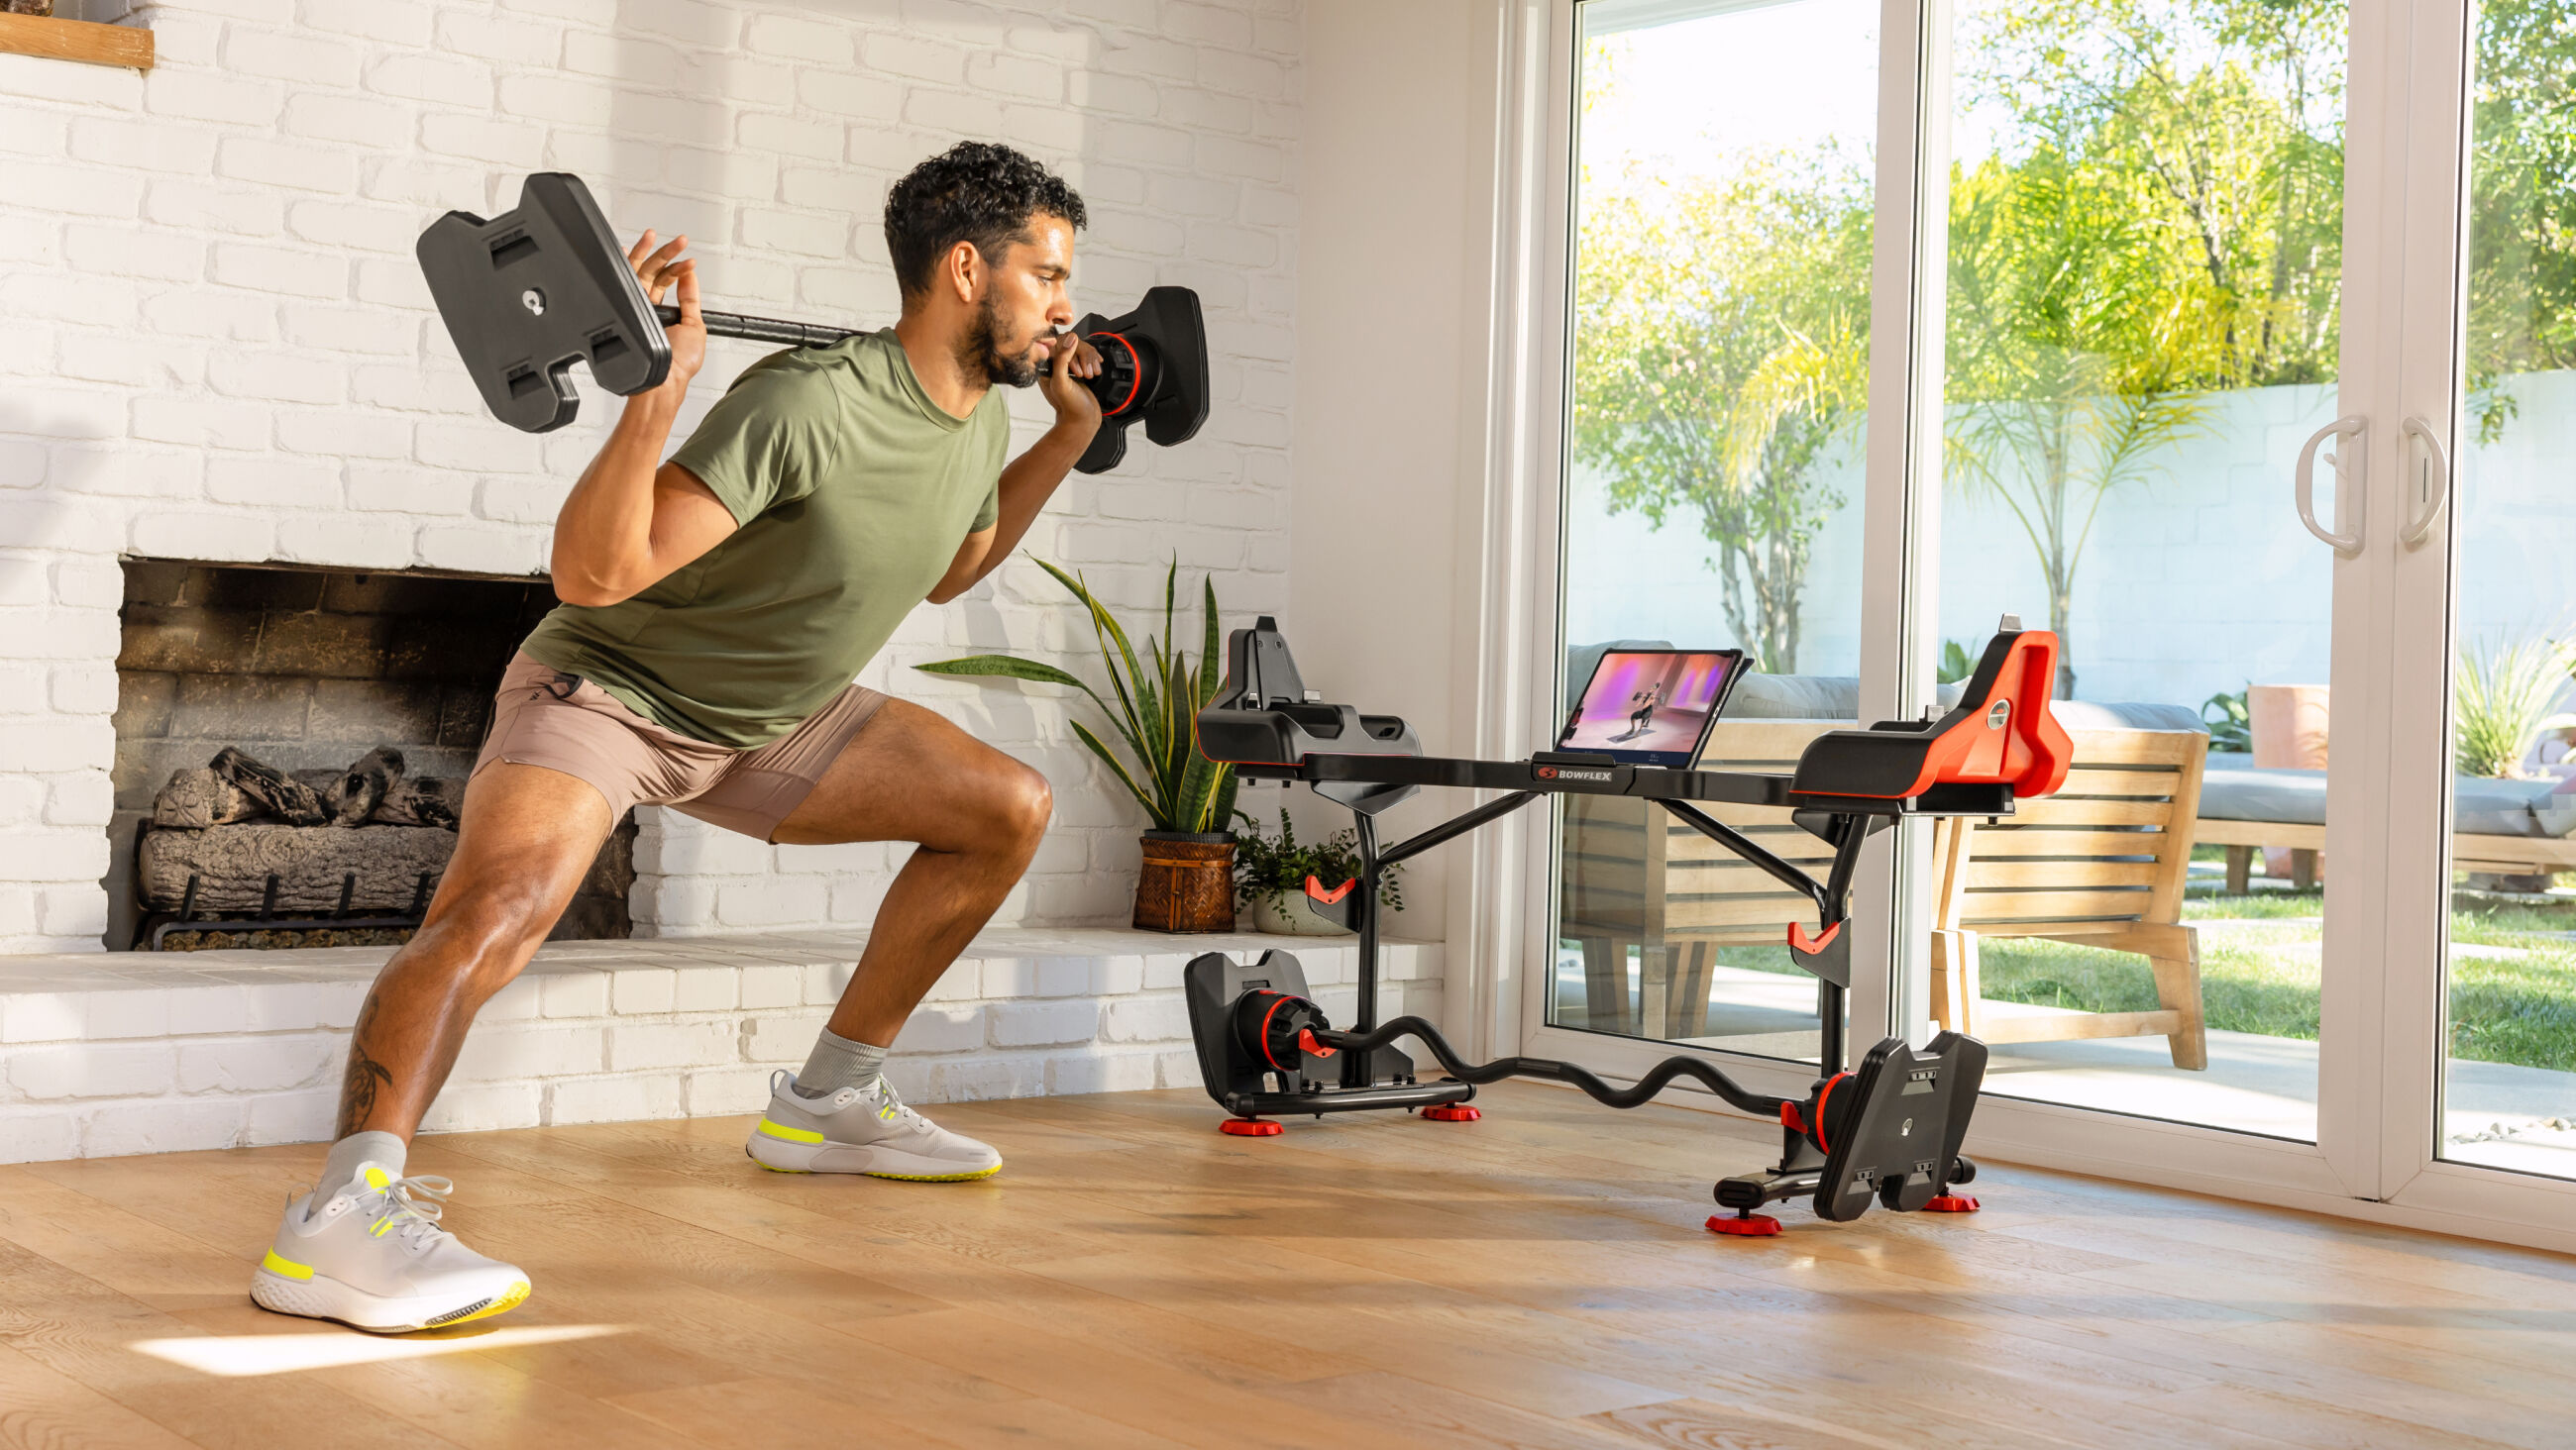 https://www.bowflex.com/dw/image/v2/AAYW_PRD/on/demandware.static/-/Sites-nautilus-master-catalog/default/dw9e24317e/images/bfx/weights/100874/2080-barbell-side-lunge-in-home-m-lr.jpg?sw=2600&sh=1464&sm=fit